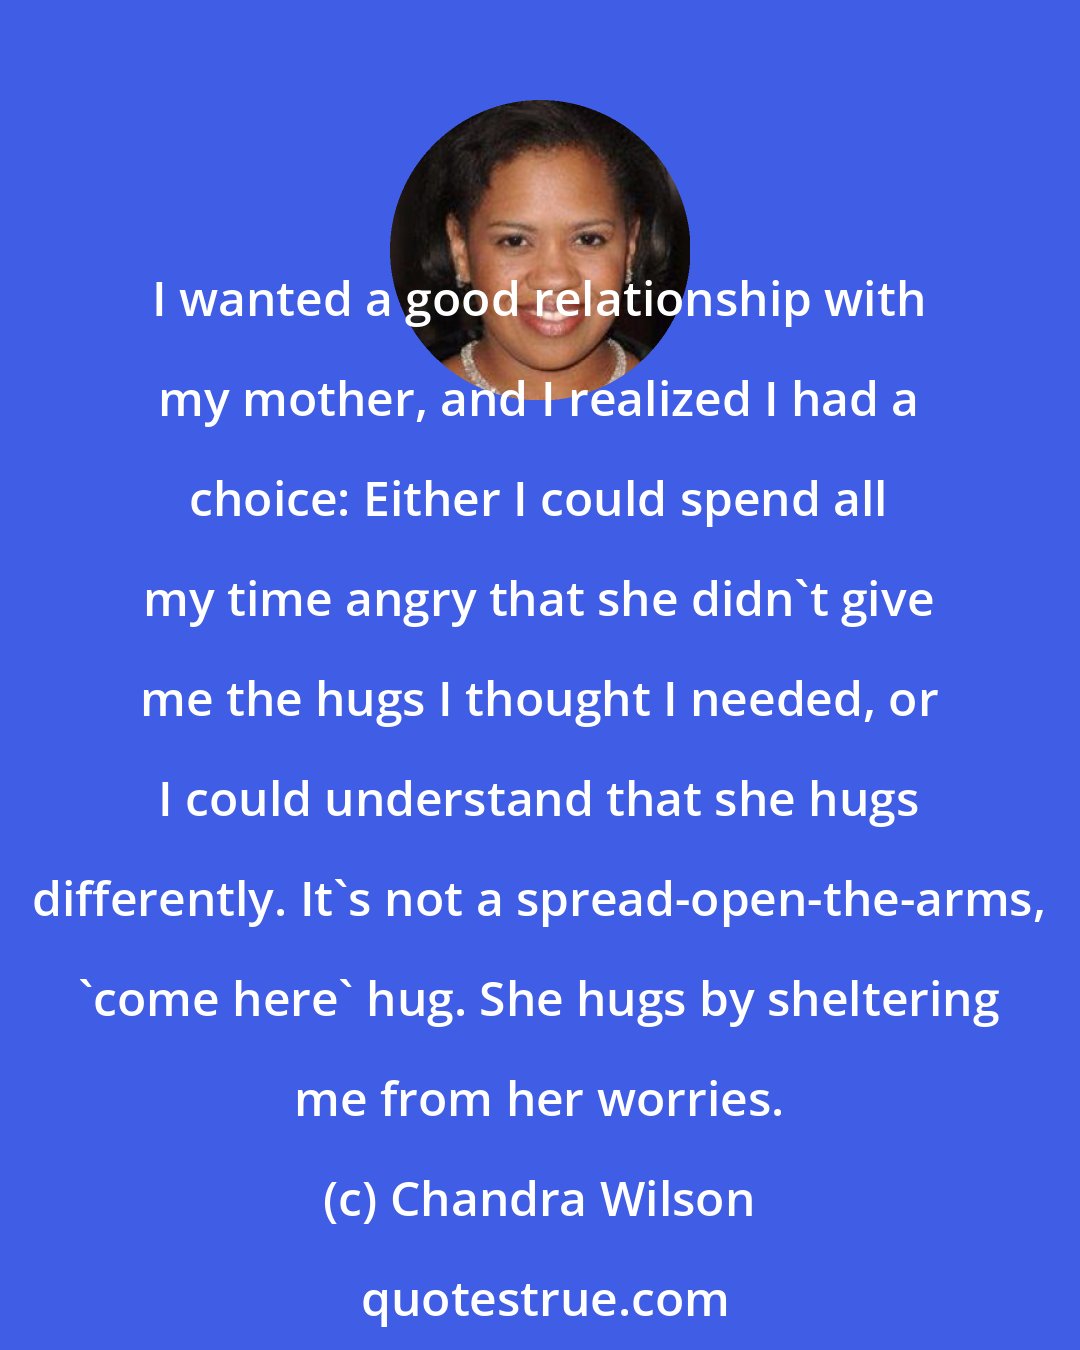 Chandra Wilson: I wanted a good relationship with my mother, and I realized I had a choice: Either I could spend all my time angry that she didn't give me the hugs I thought I needed, or I could understand that she hugs differently. It's not a spread-open-the-arms, 'come here' hug. She hugs by sheltering me from her worries.